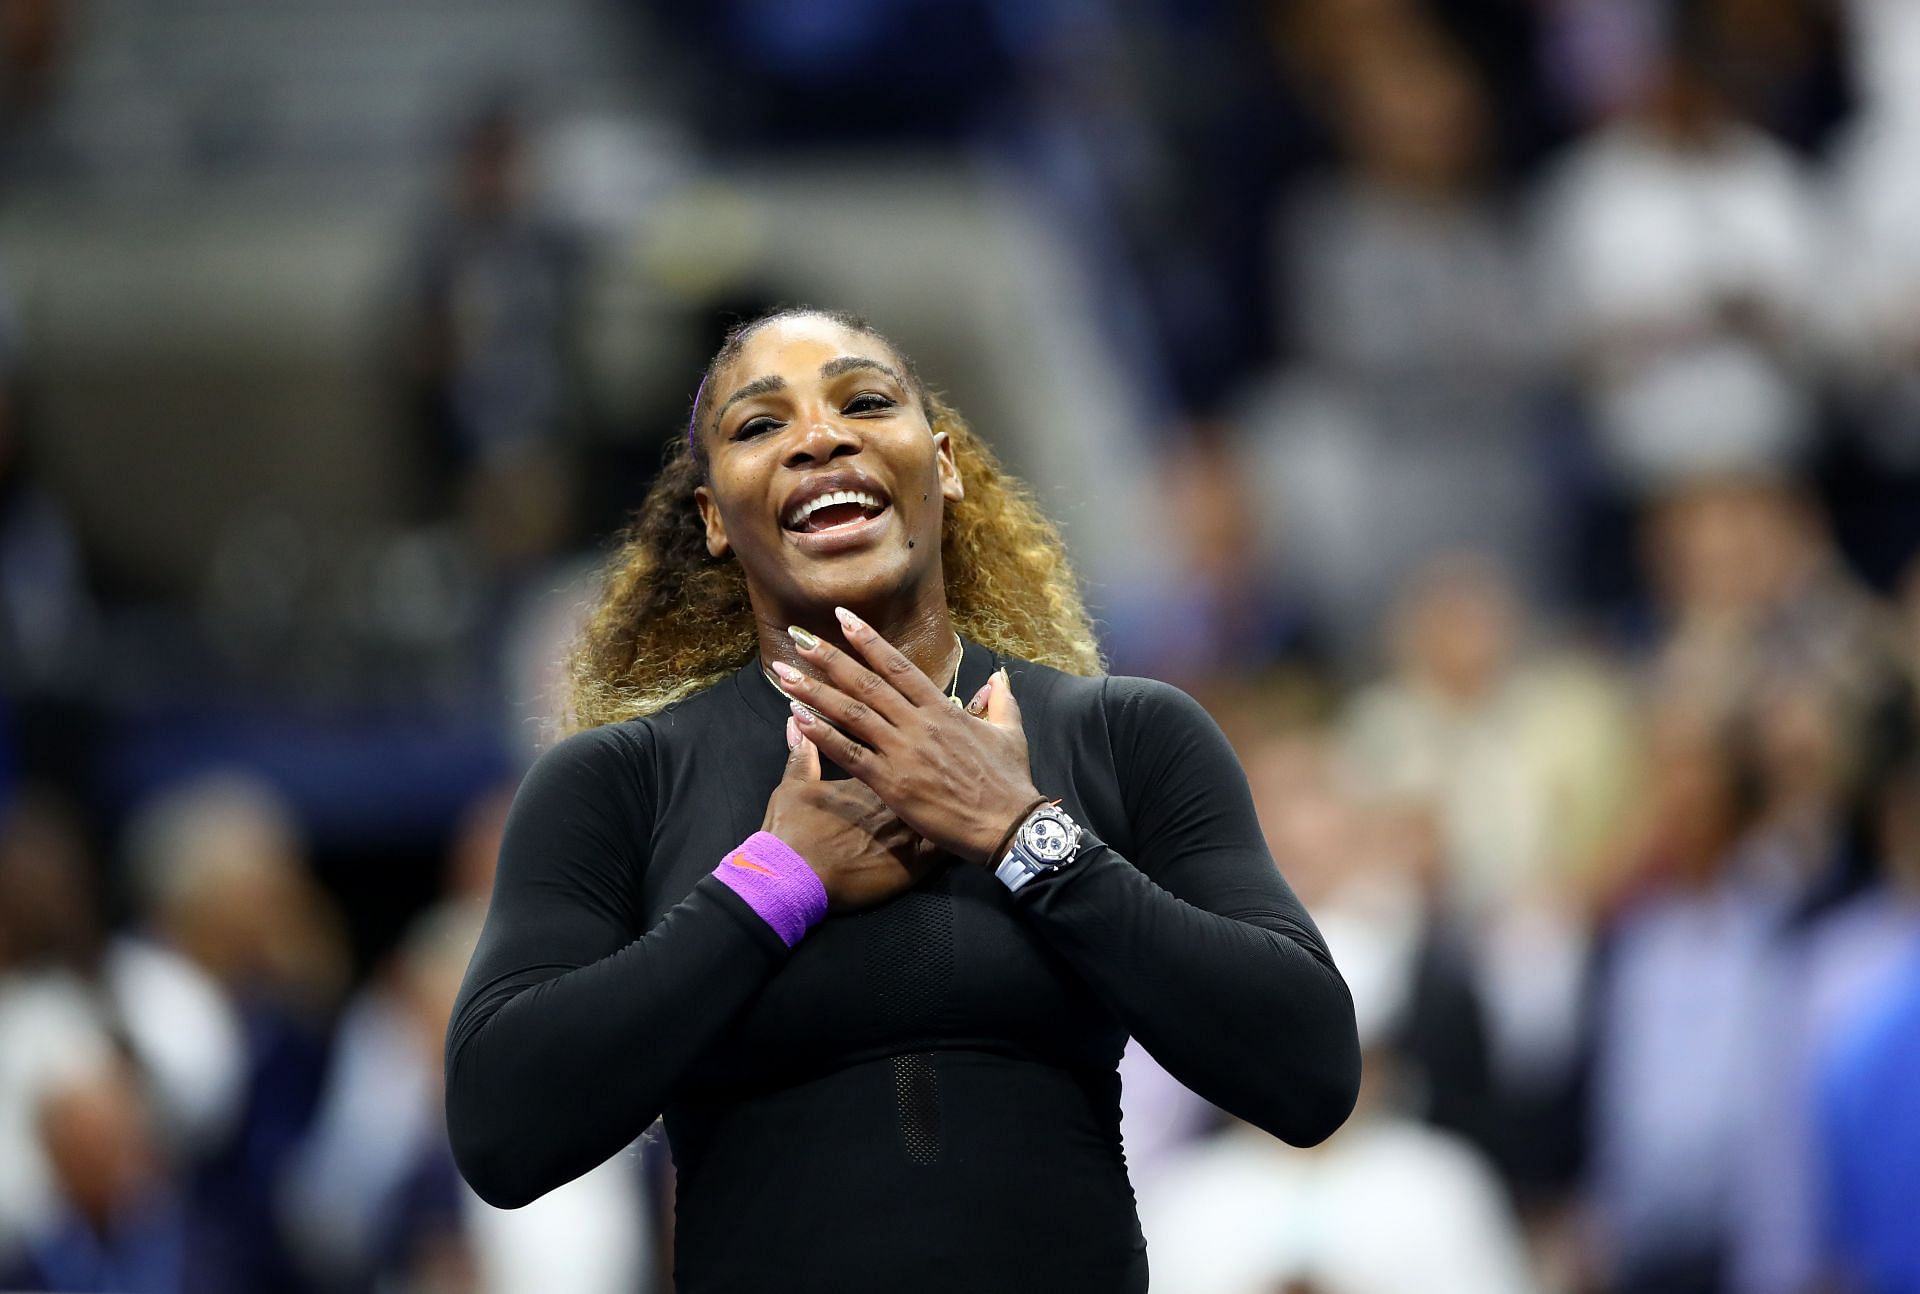 Serena Williams at the 2019 US Open.